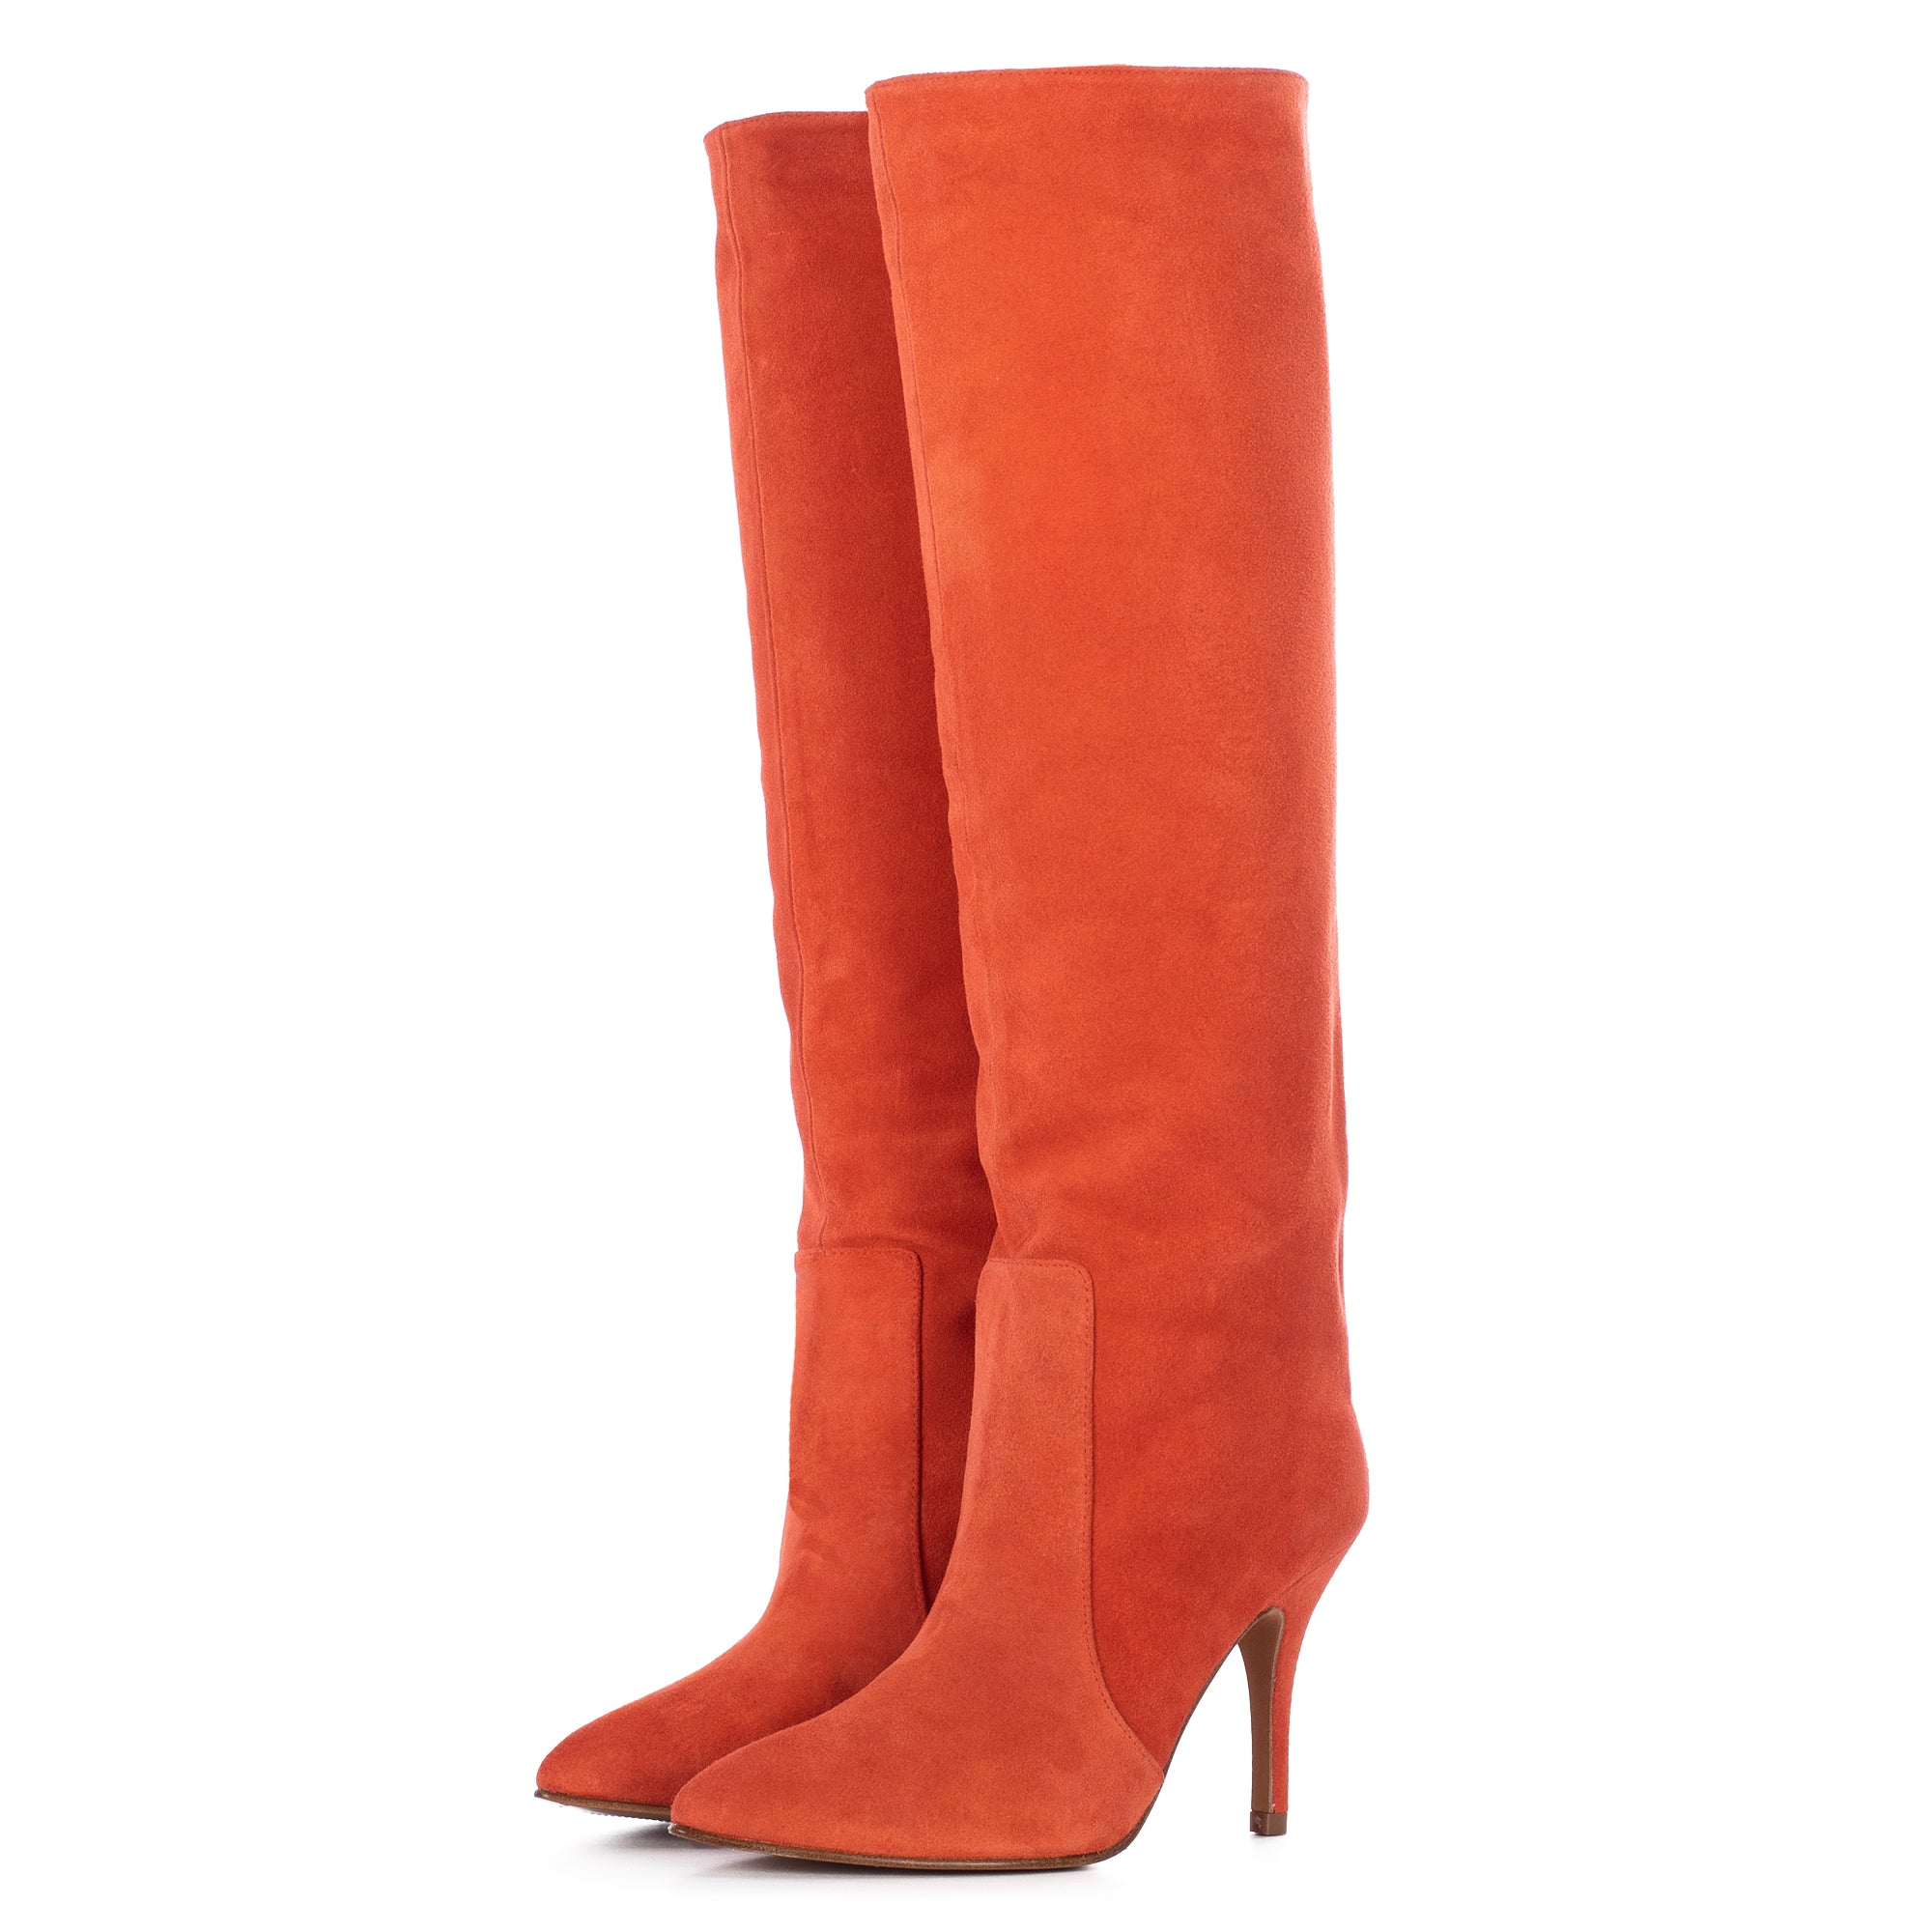 TROPICAL SUEDE KNEE-HIGH BOOTS